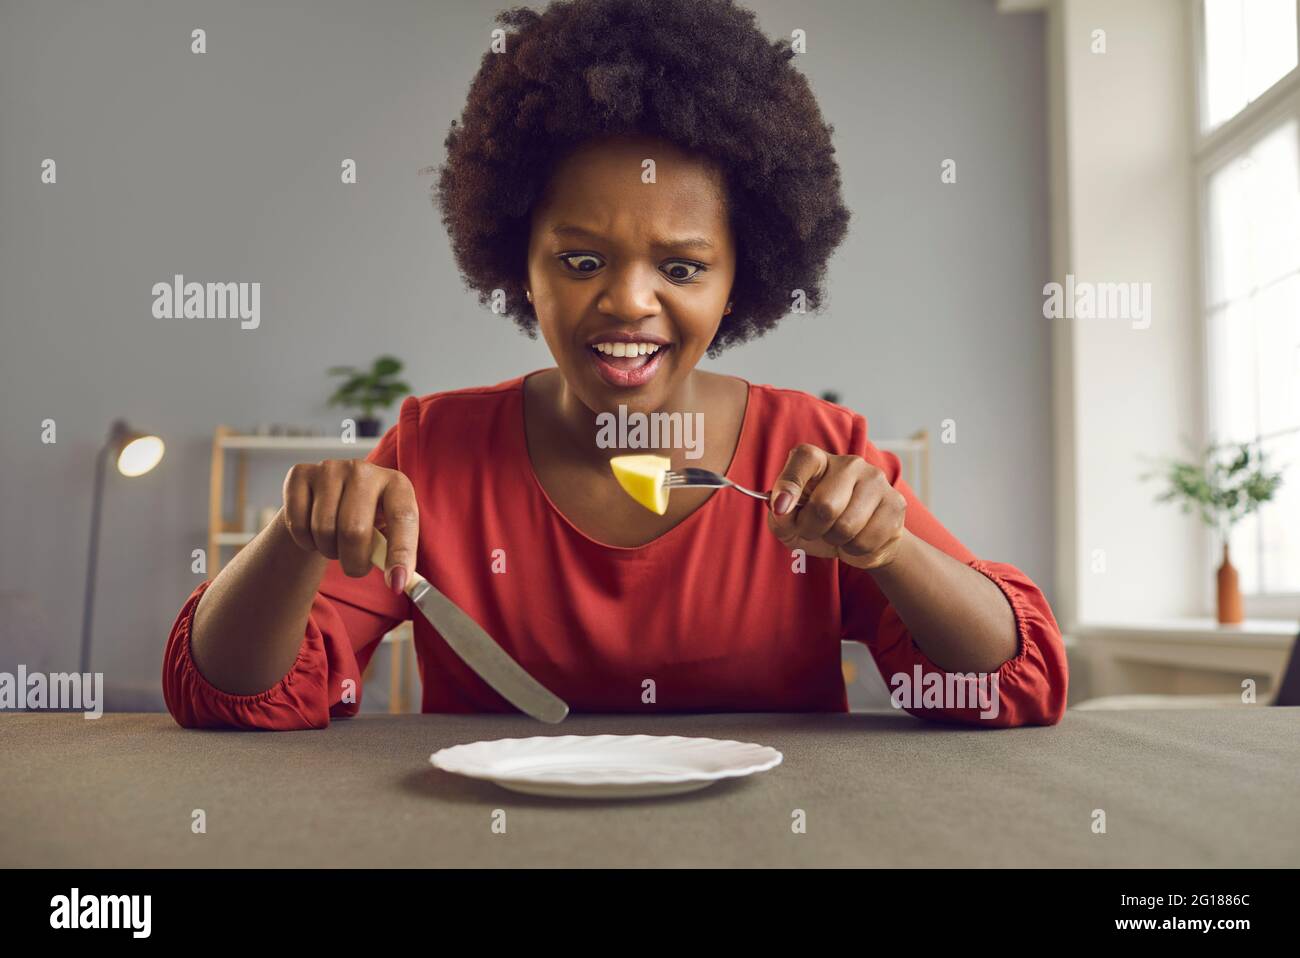 Unhappy angry screaming african american woman on diet looking at piece of apple Stock Photo